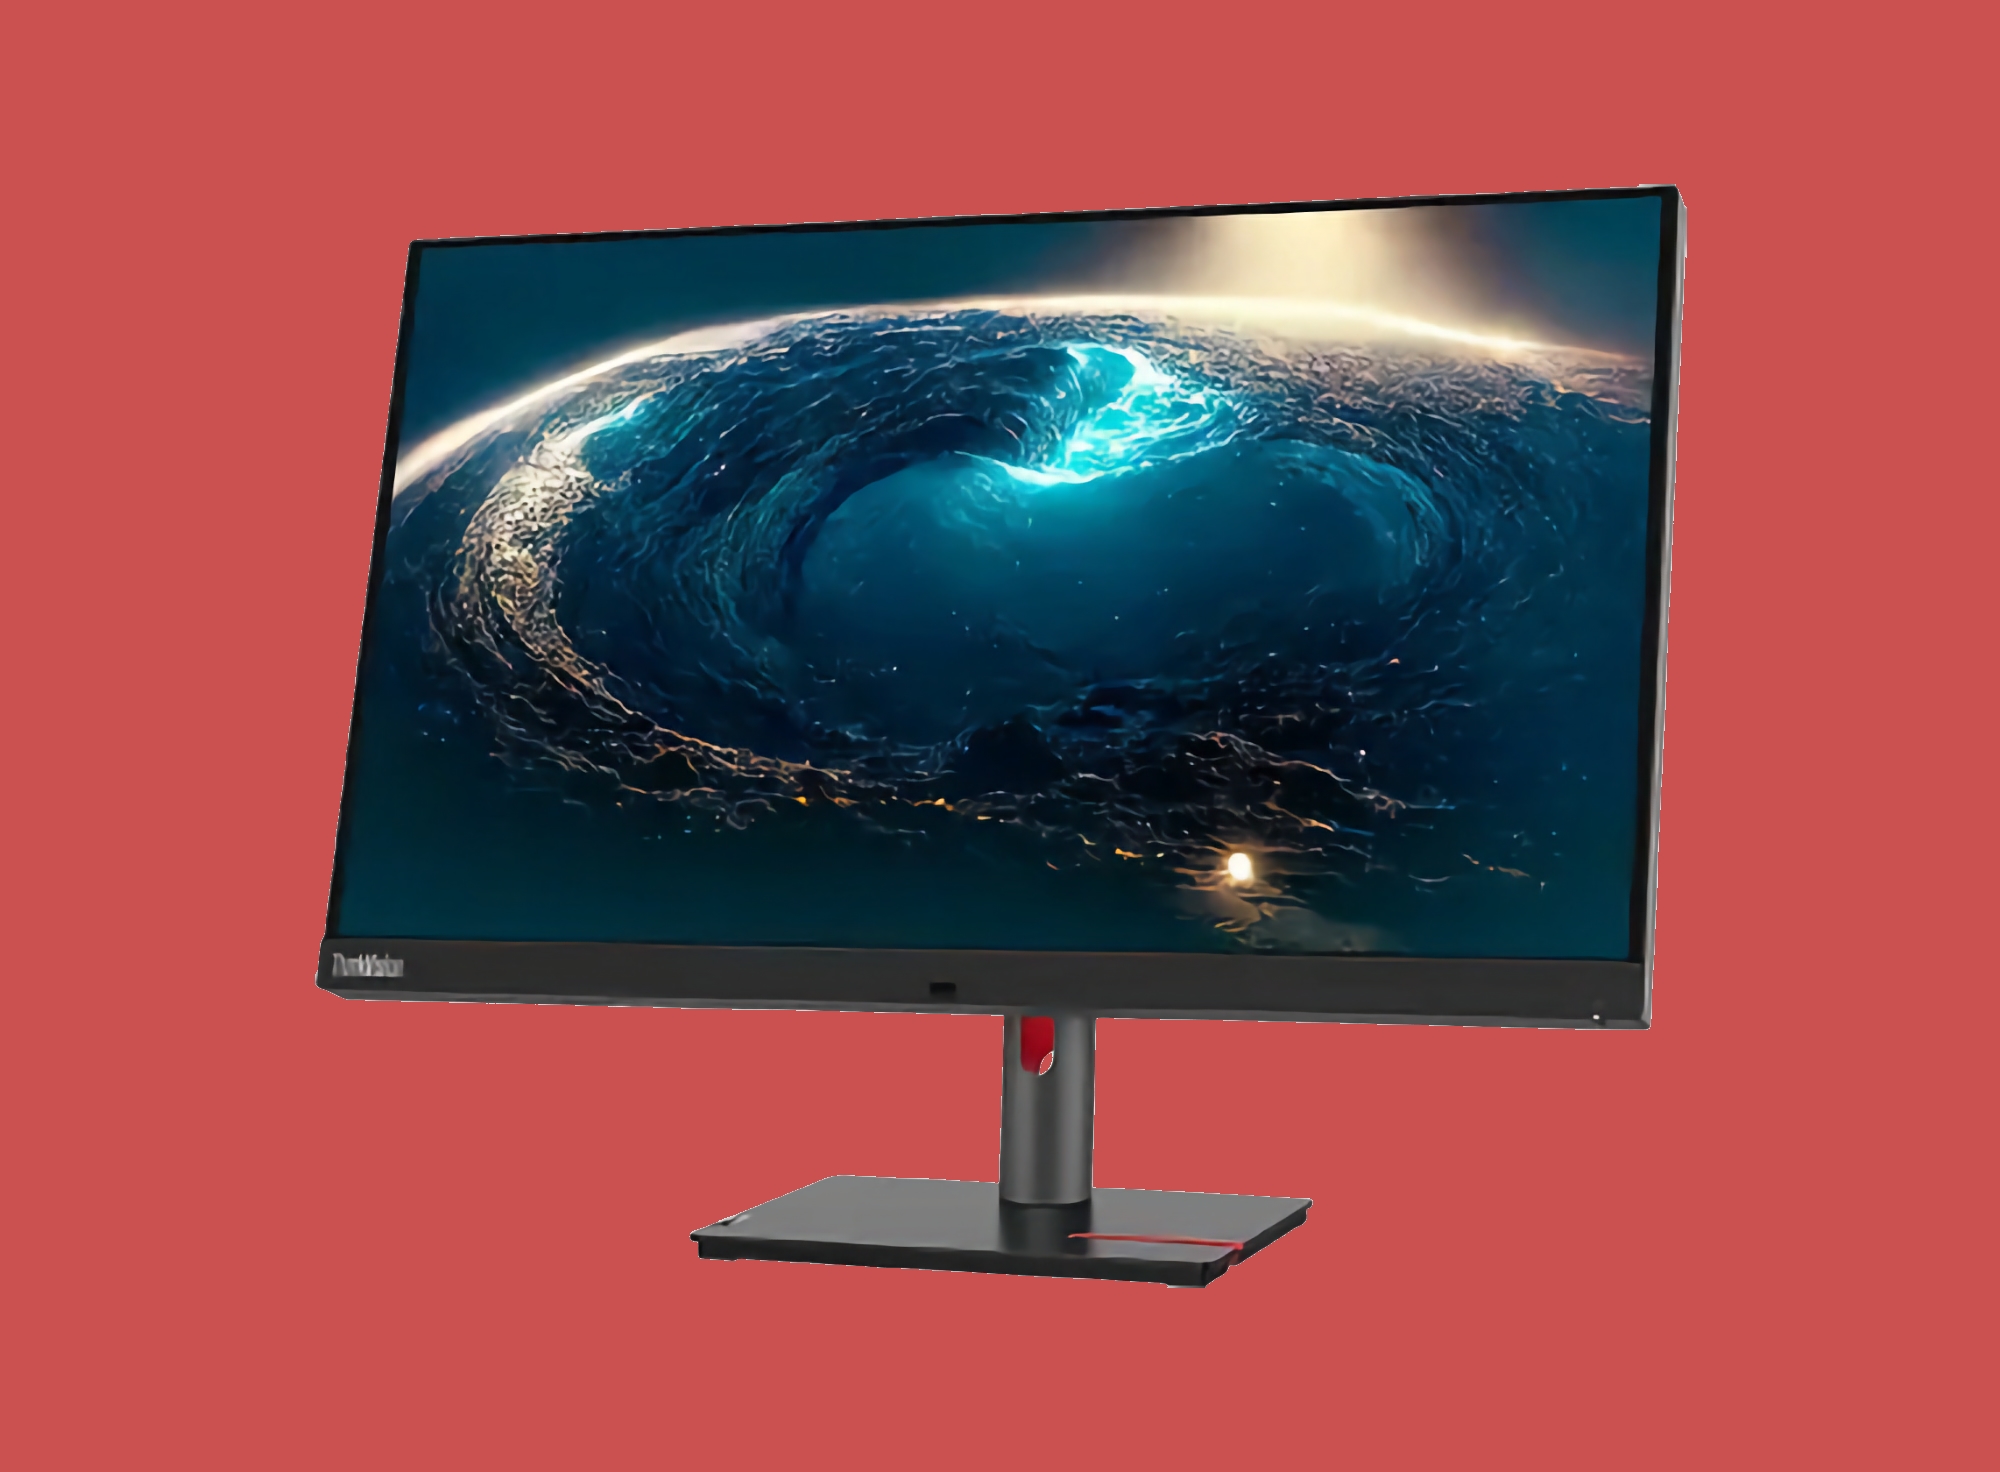 Lenovo ThinkVision P32pz-30 with mini-LED screen and USB 4 debuted in Europe